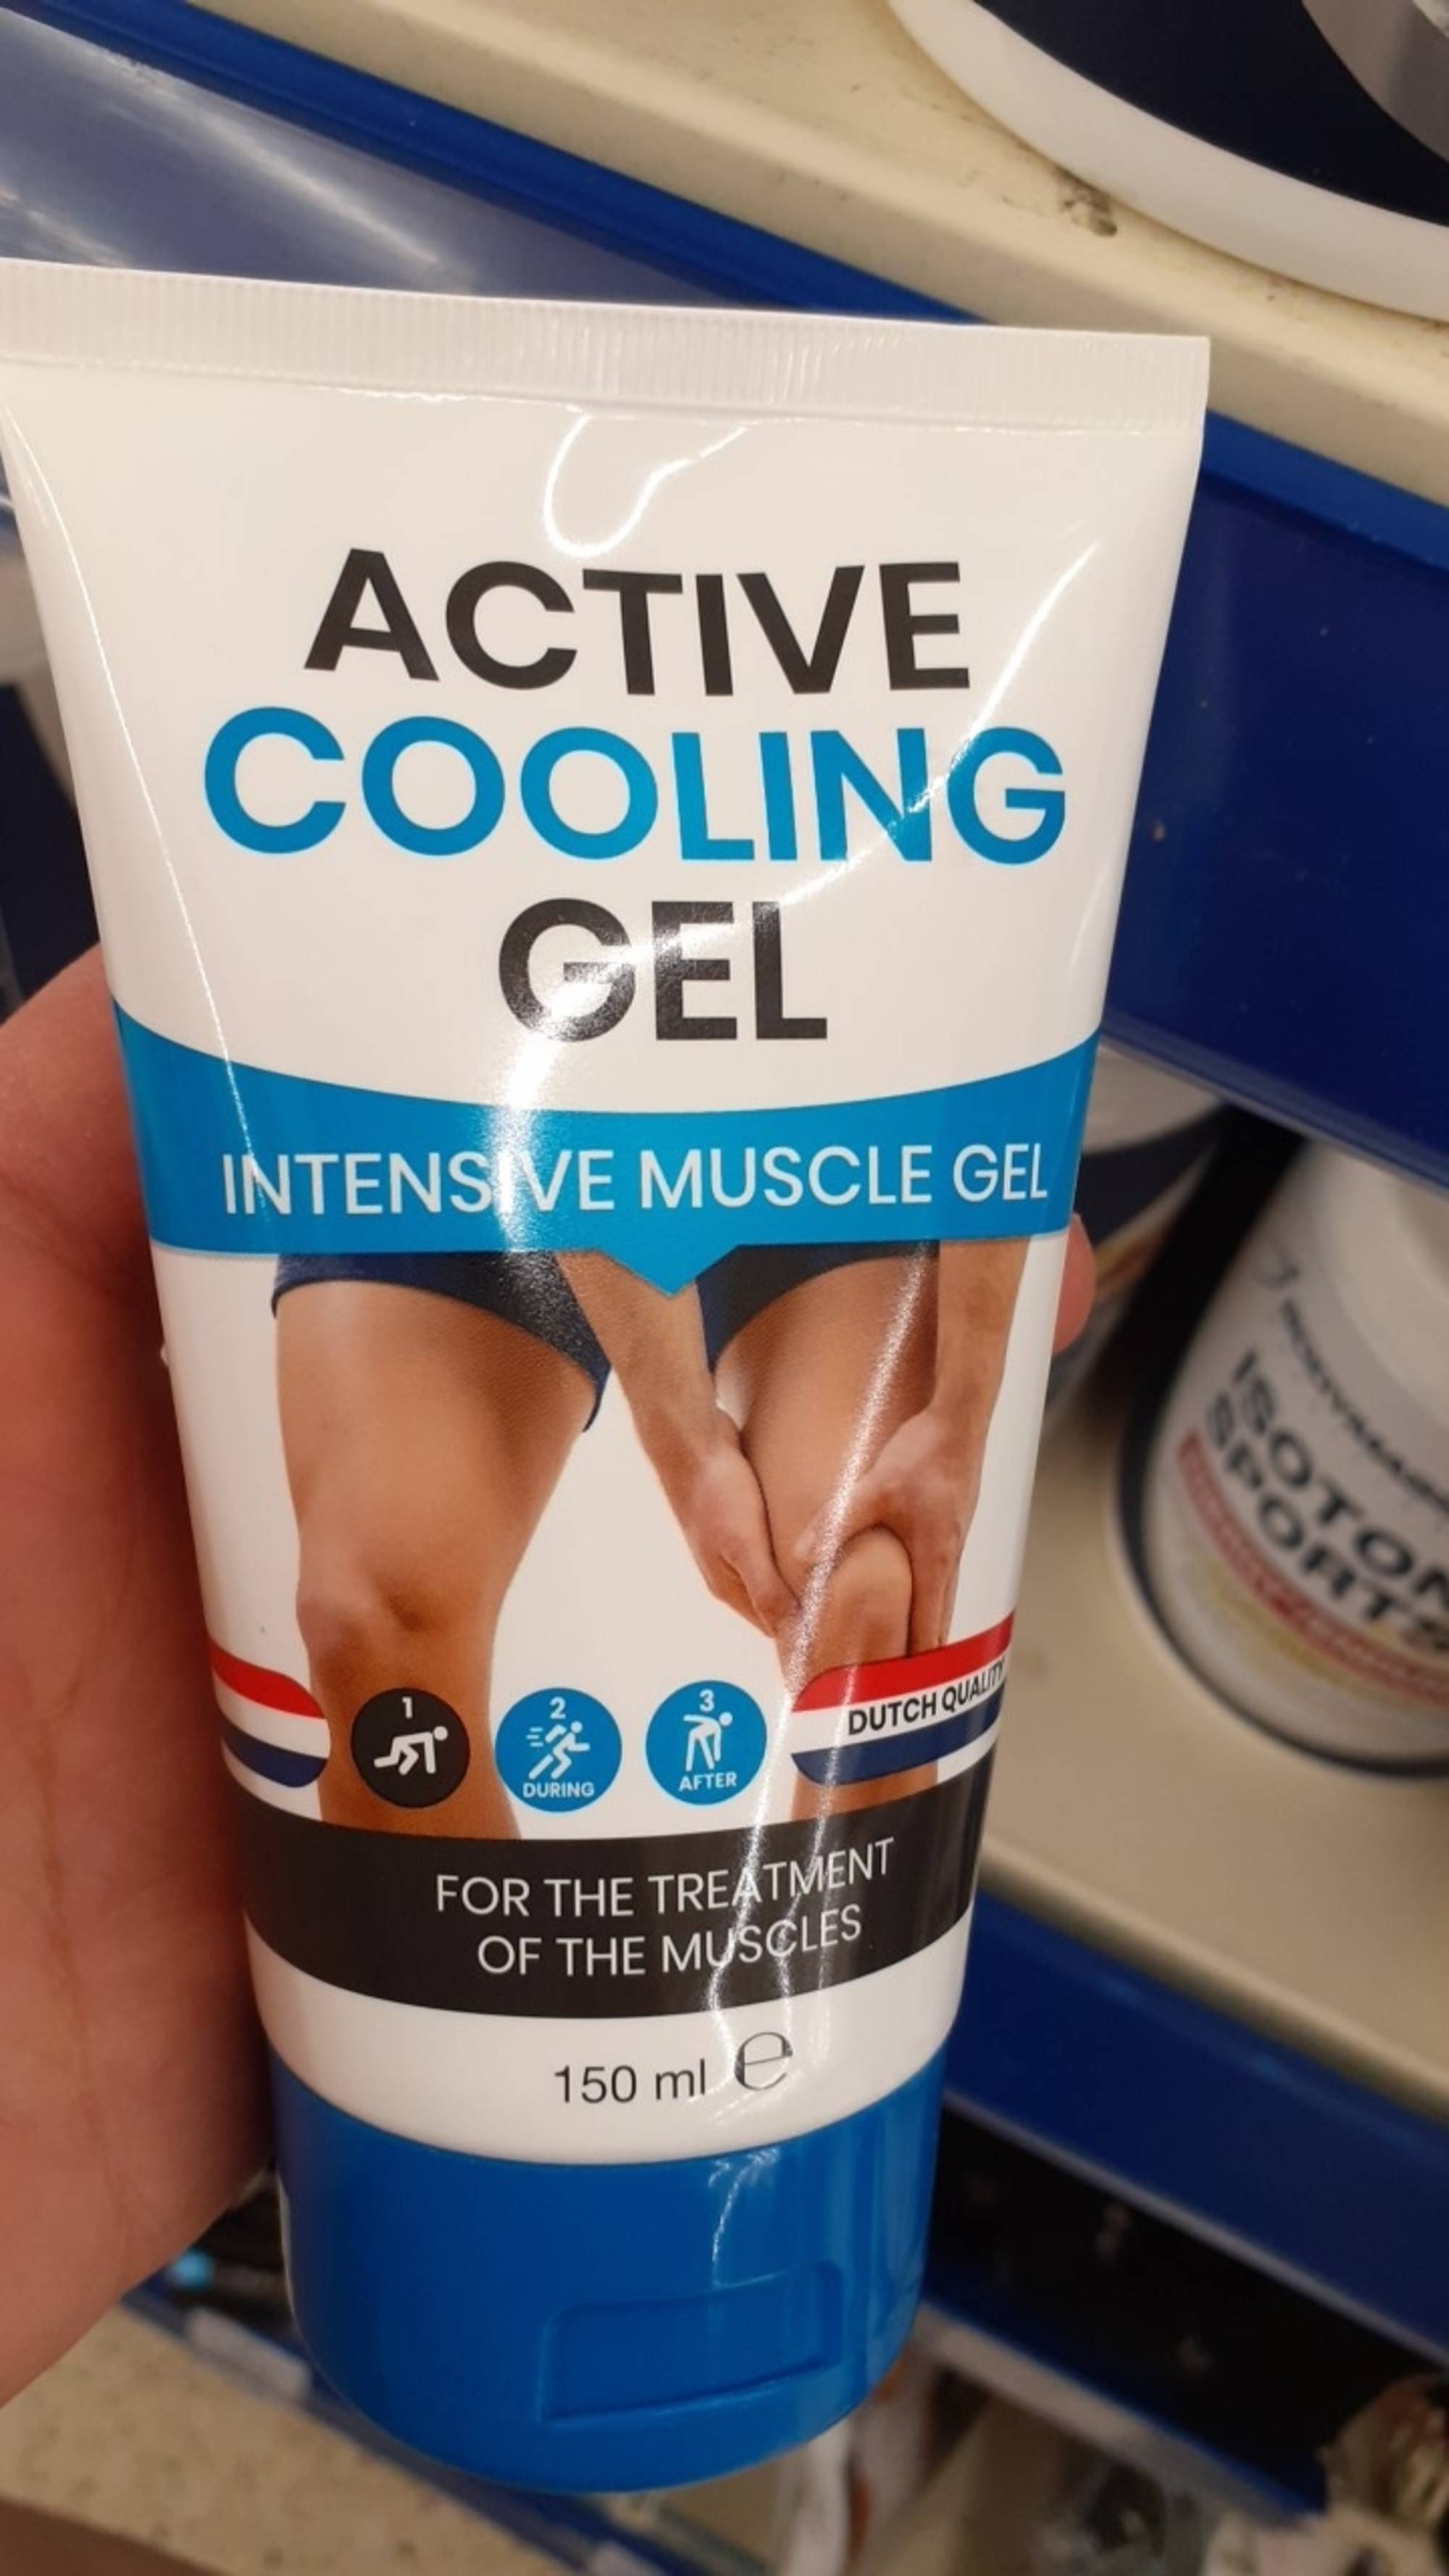 MASCOT EUROPE BV - Active cooling - Intensive muscle gel